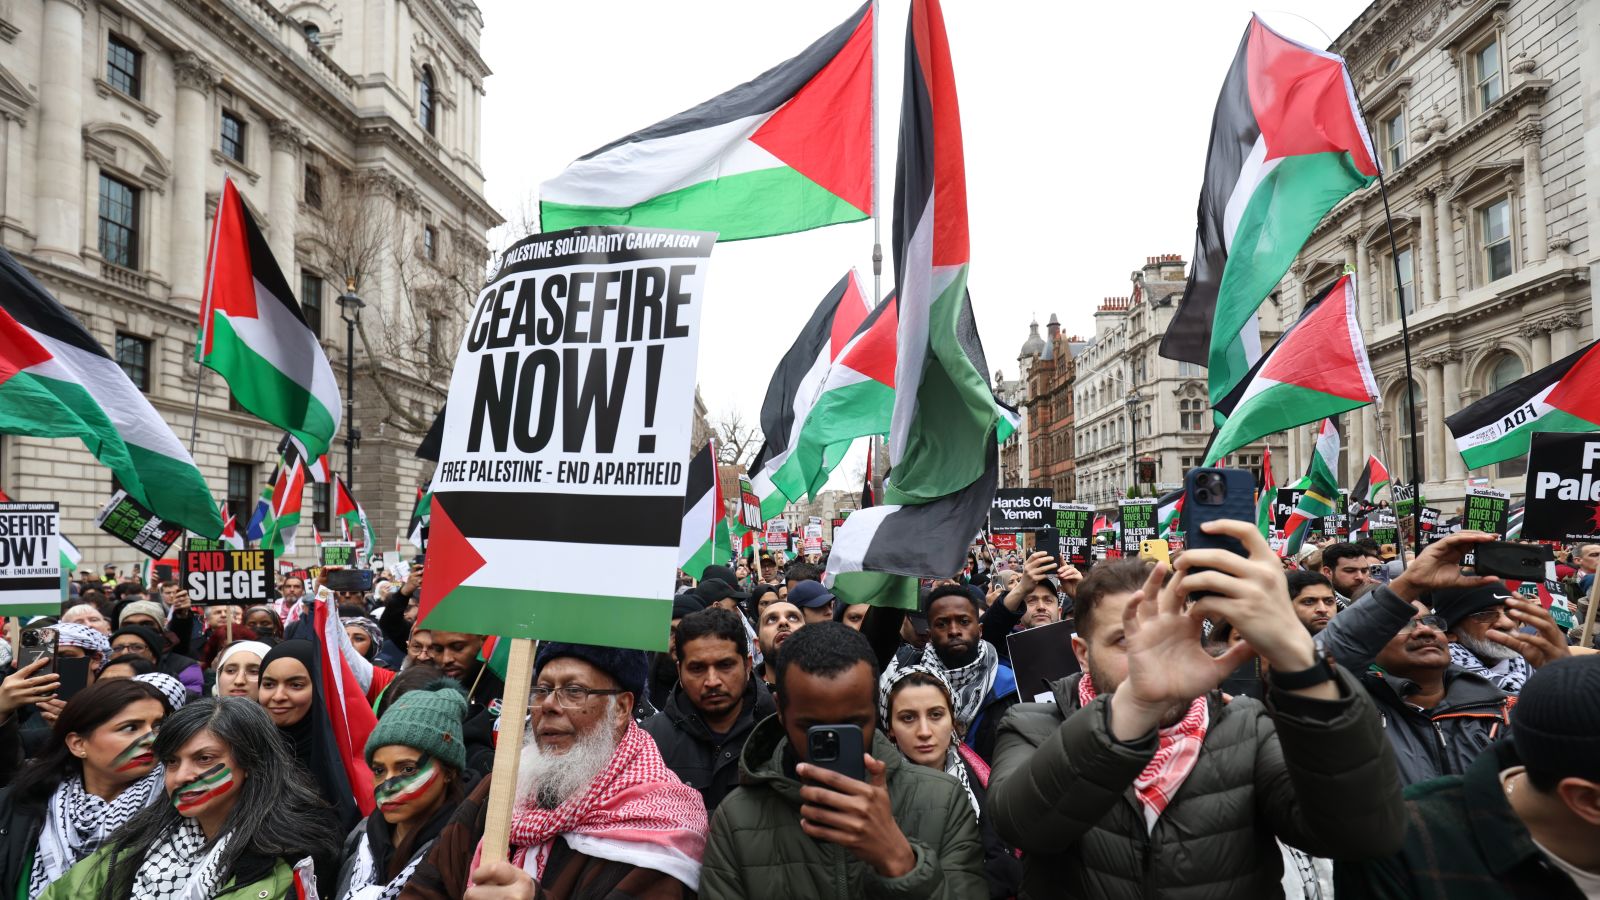 Over 10,000 pro-Palestine supporters march through London calling for ...